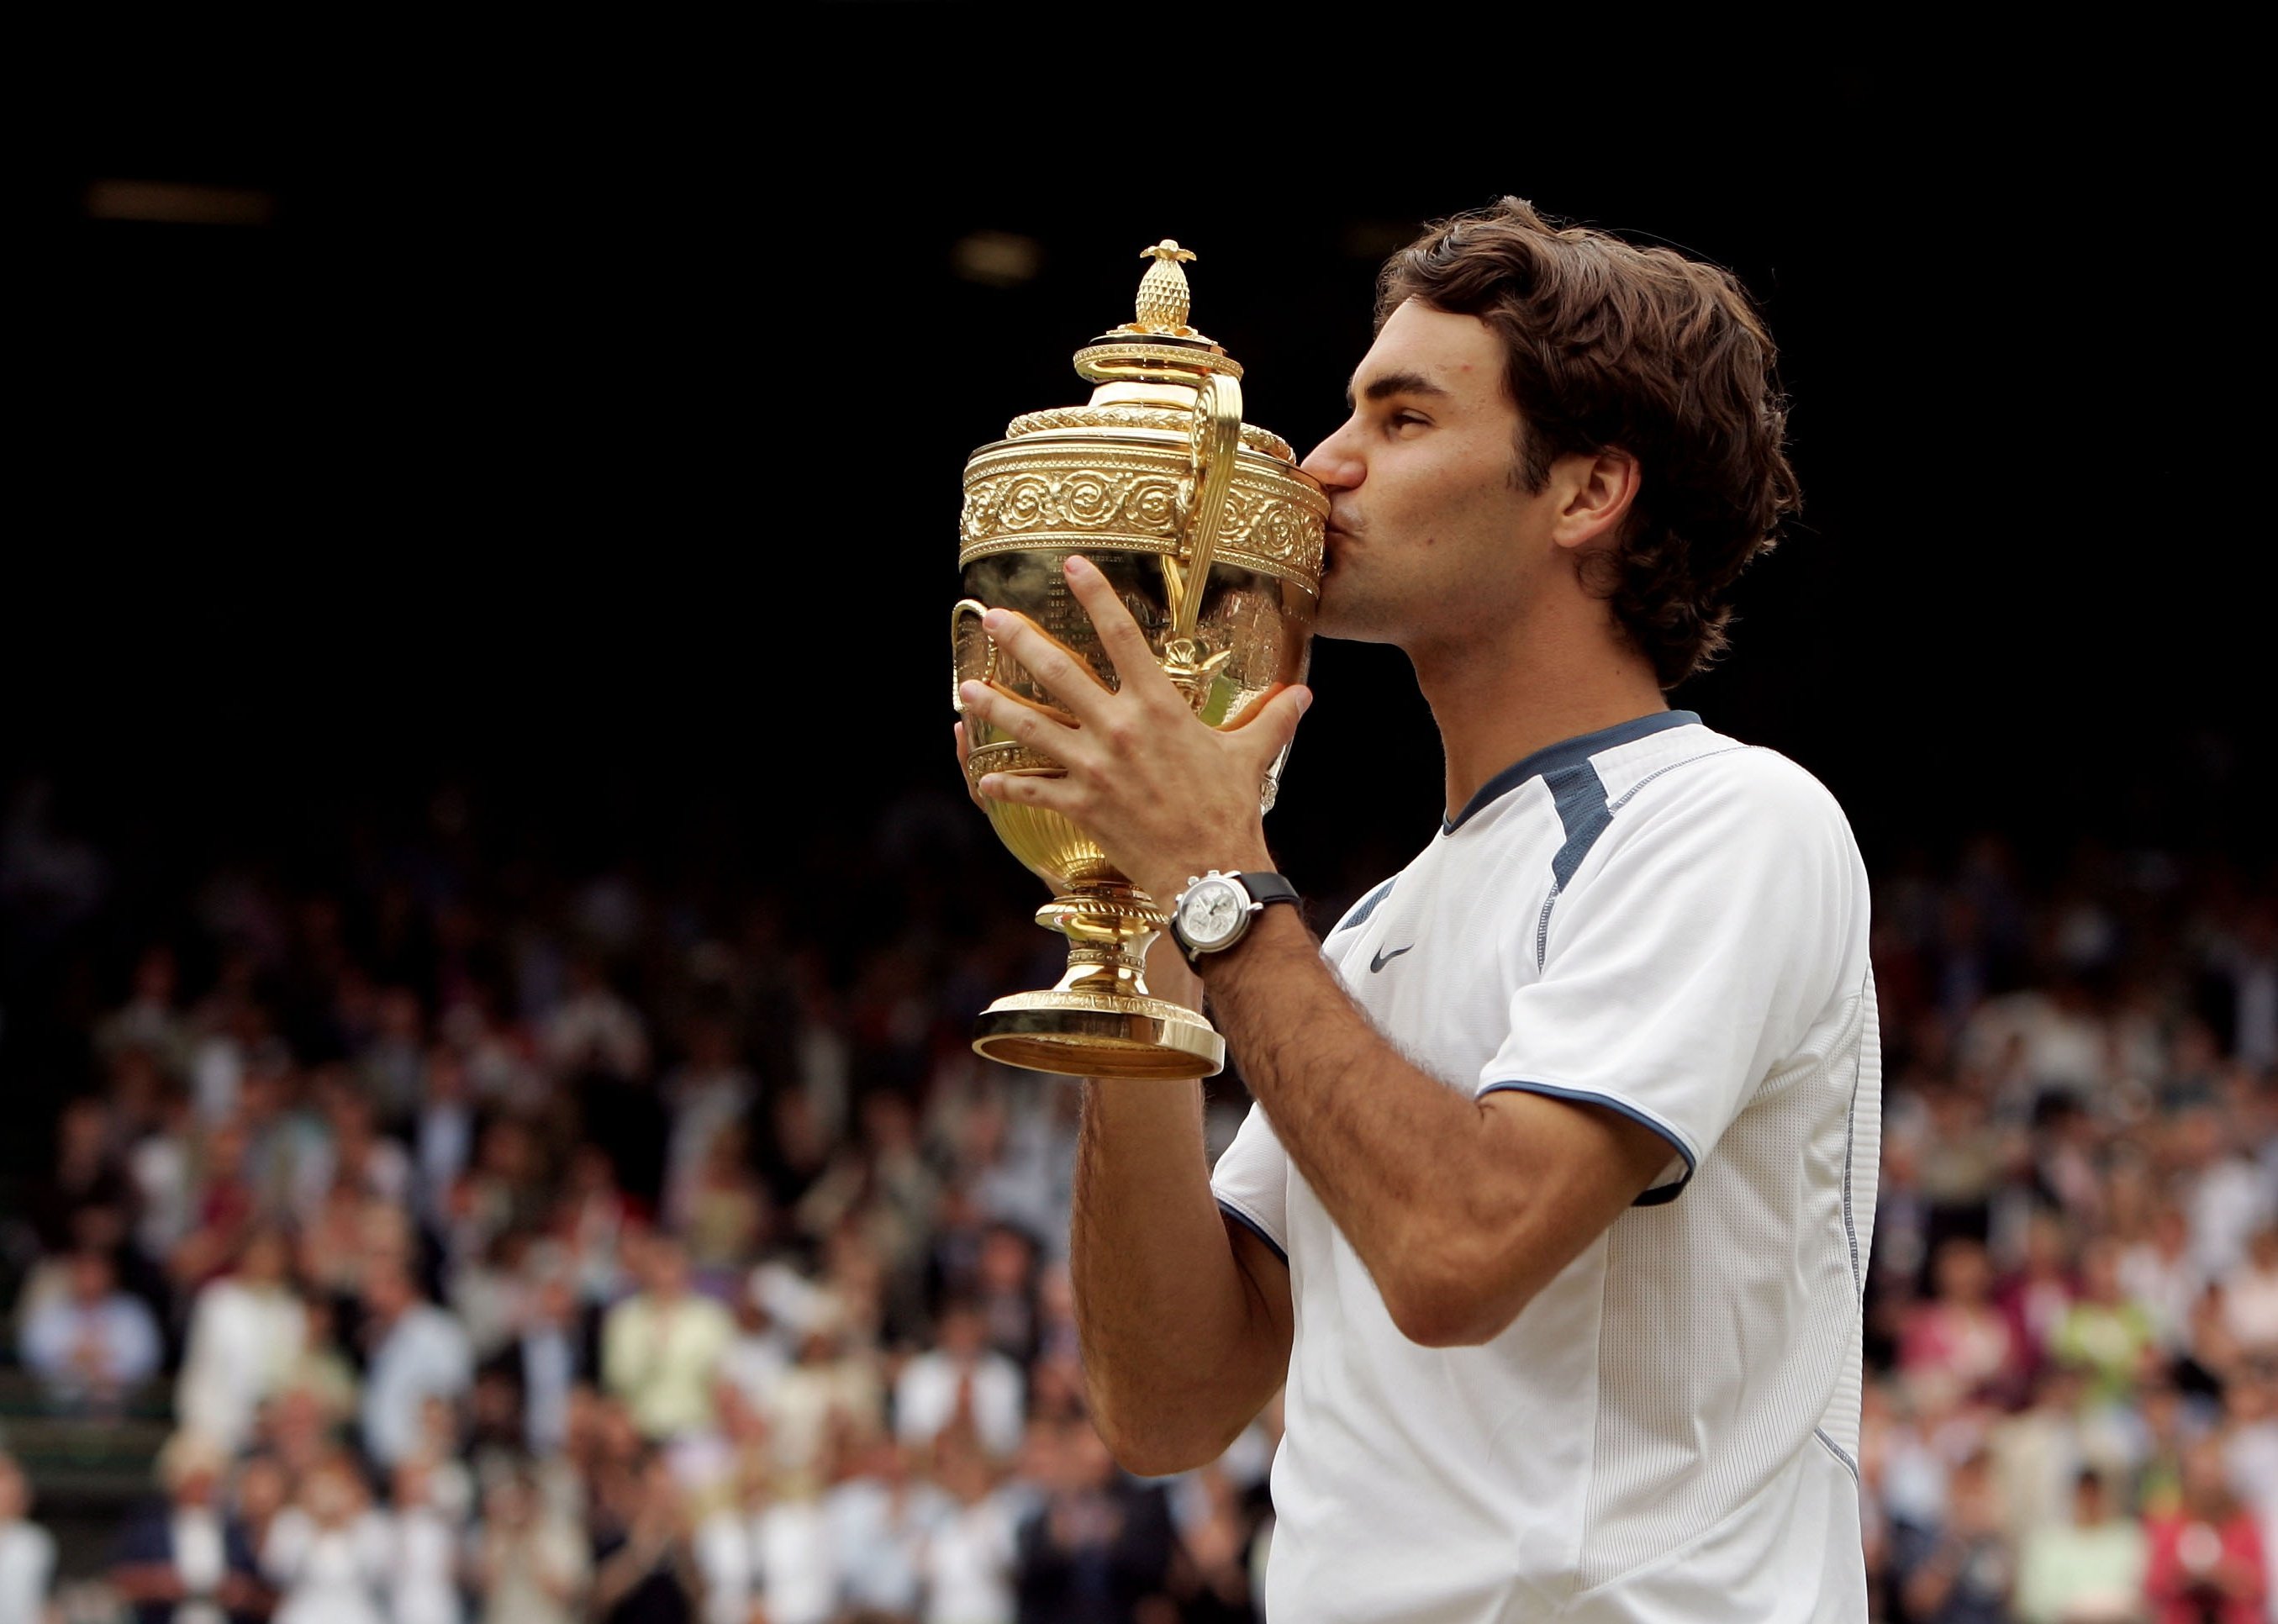 Roger Federer celebrates his win by kissing the Wimbledon trophy.